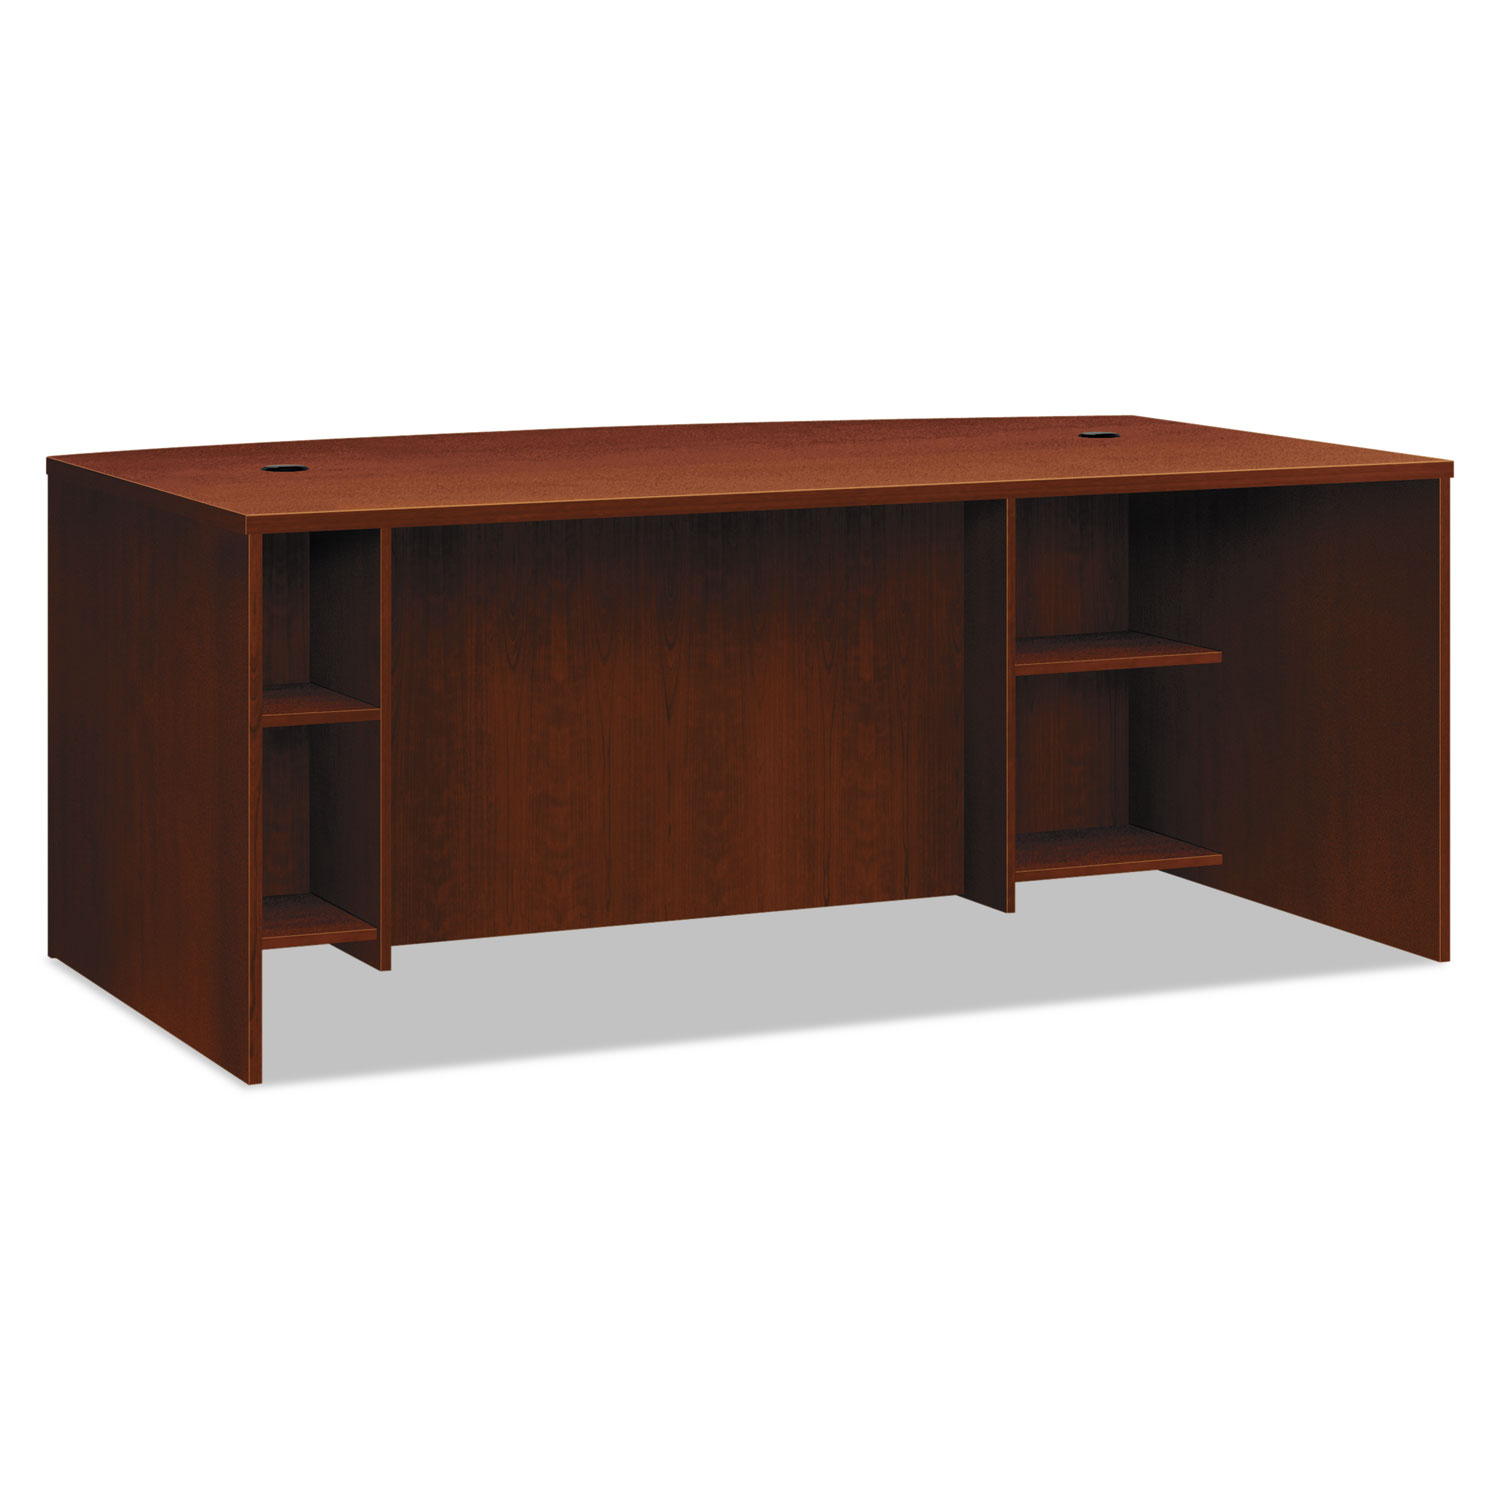 BL Laminate Series Breakfront Desk Shell Bow Front, 72w x 42d x 29h, Med. Cherry